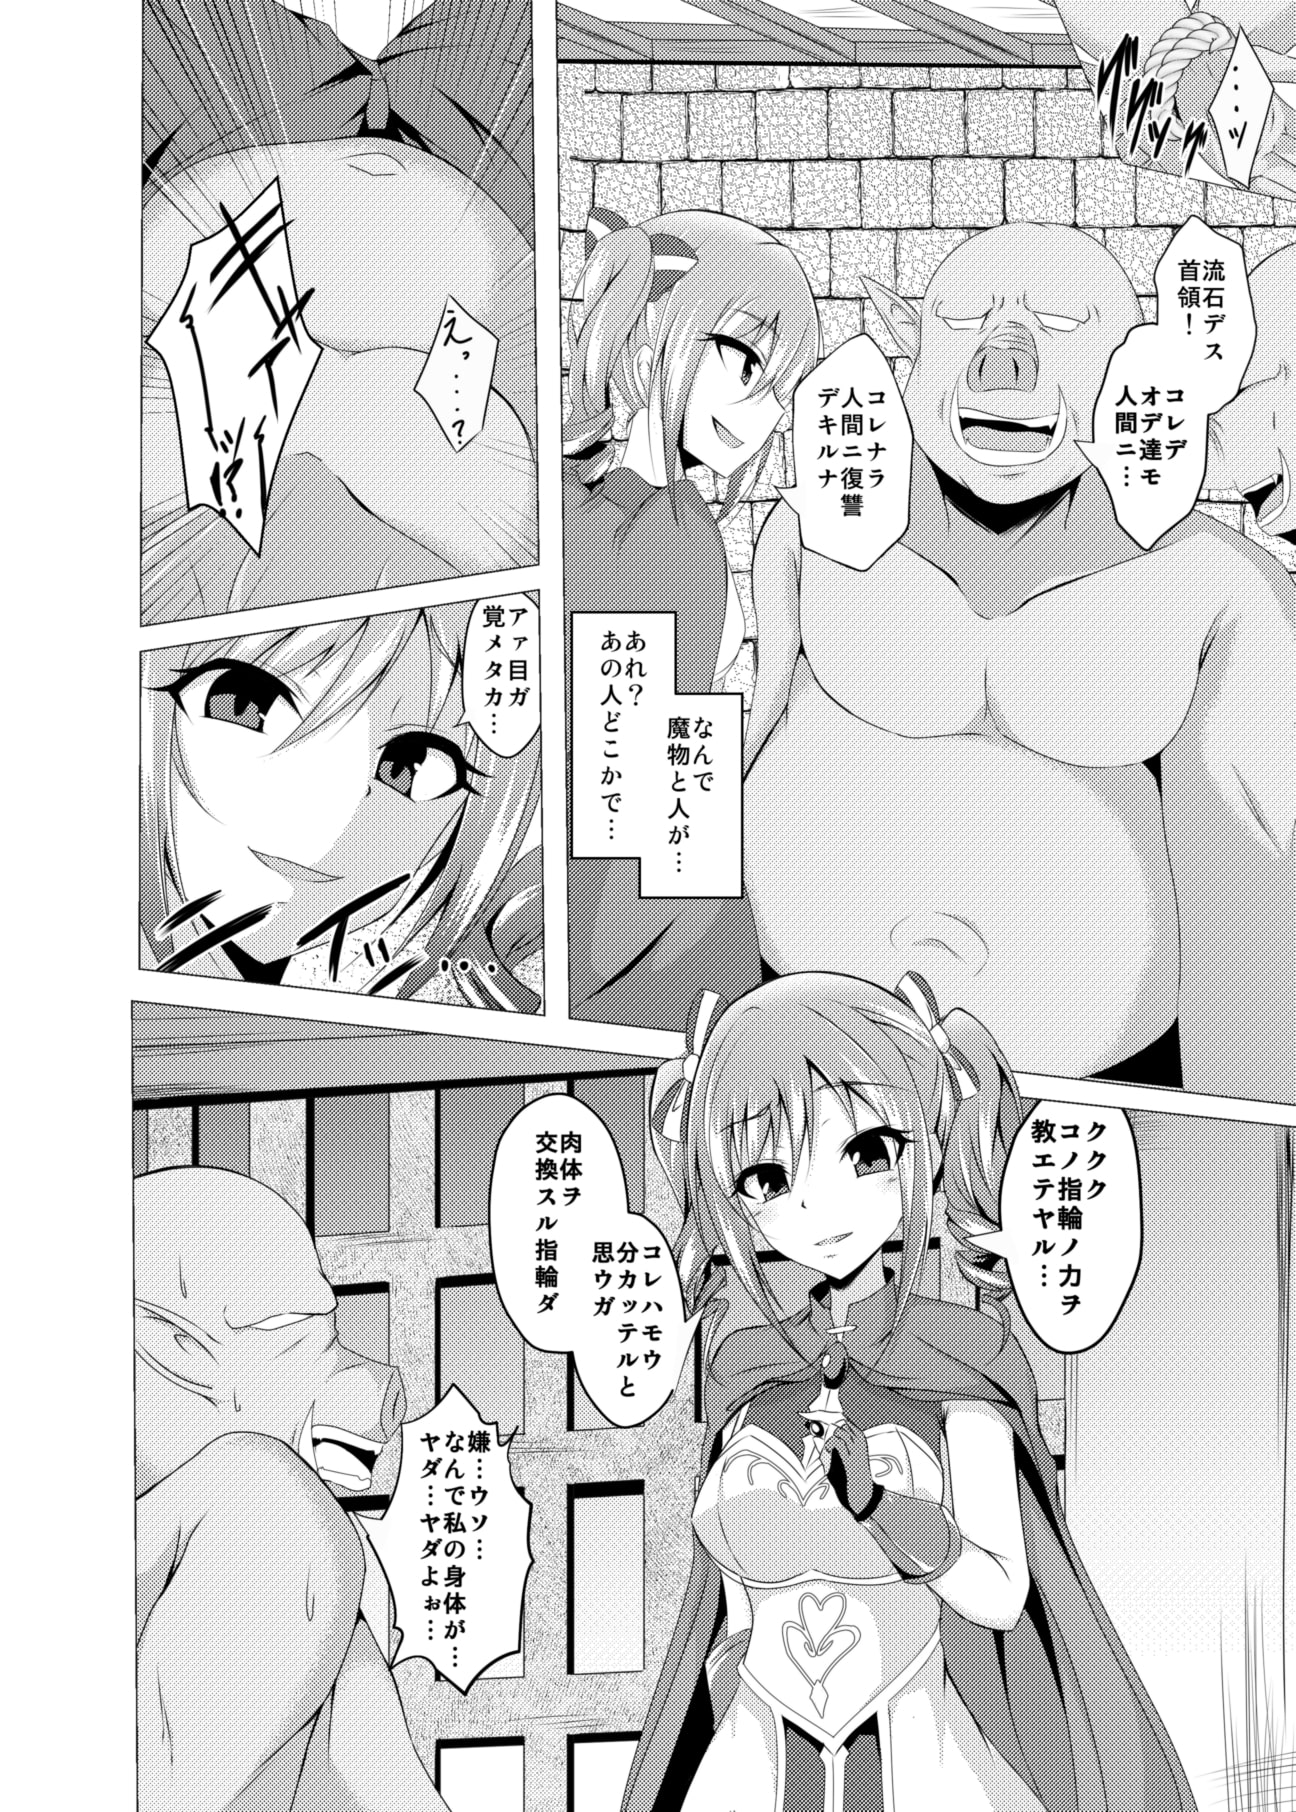 Heroine Ranko Swaps Bodies with an Orc